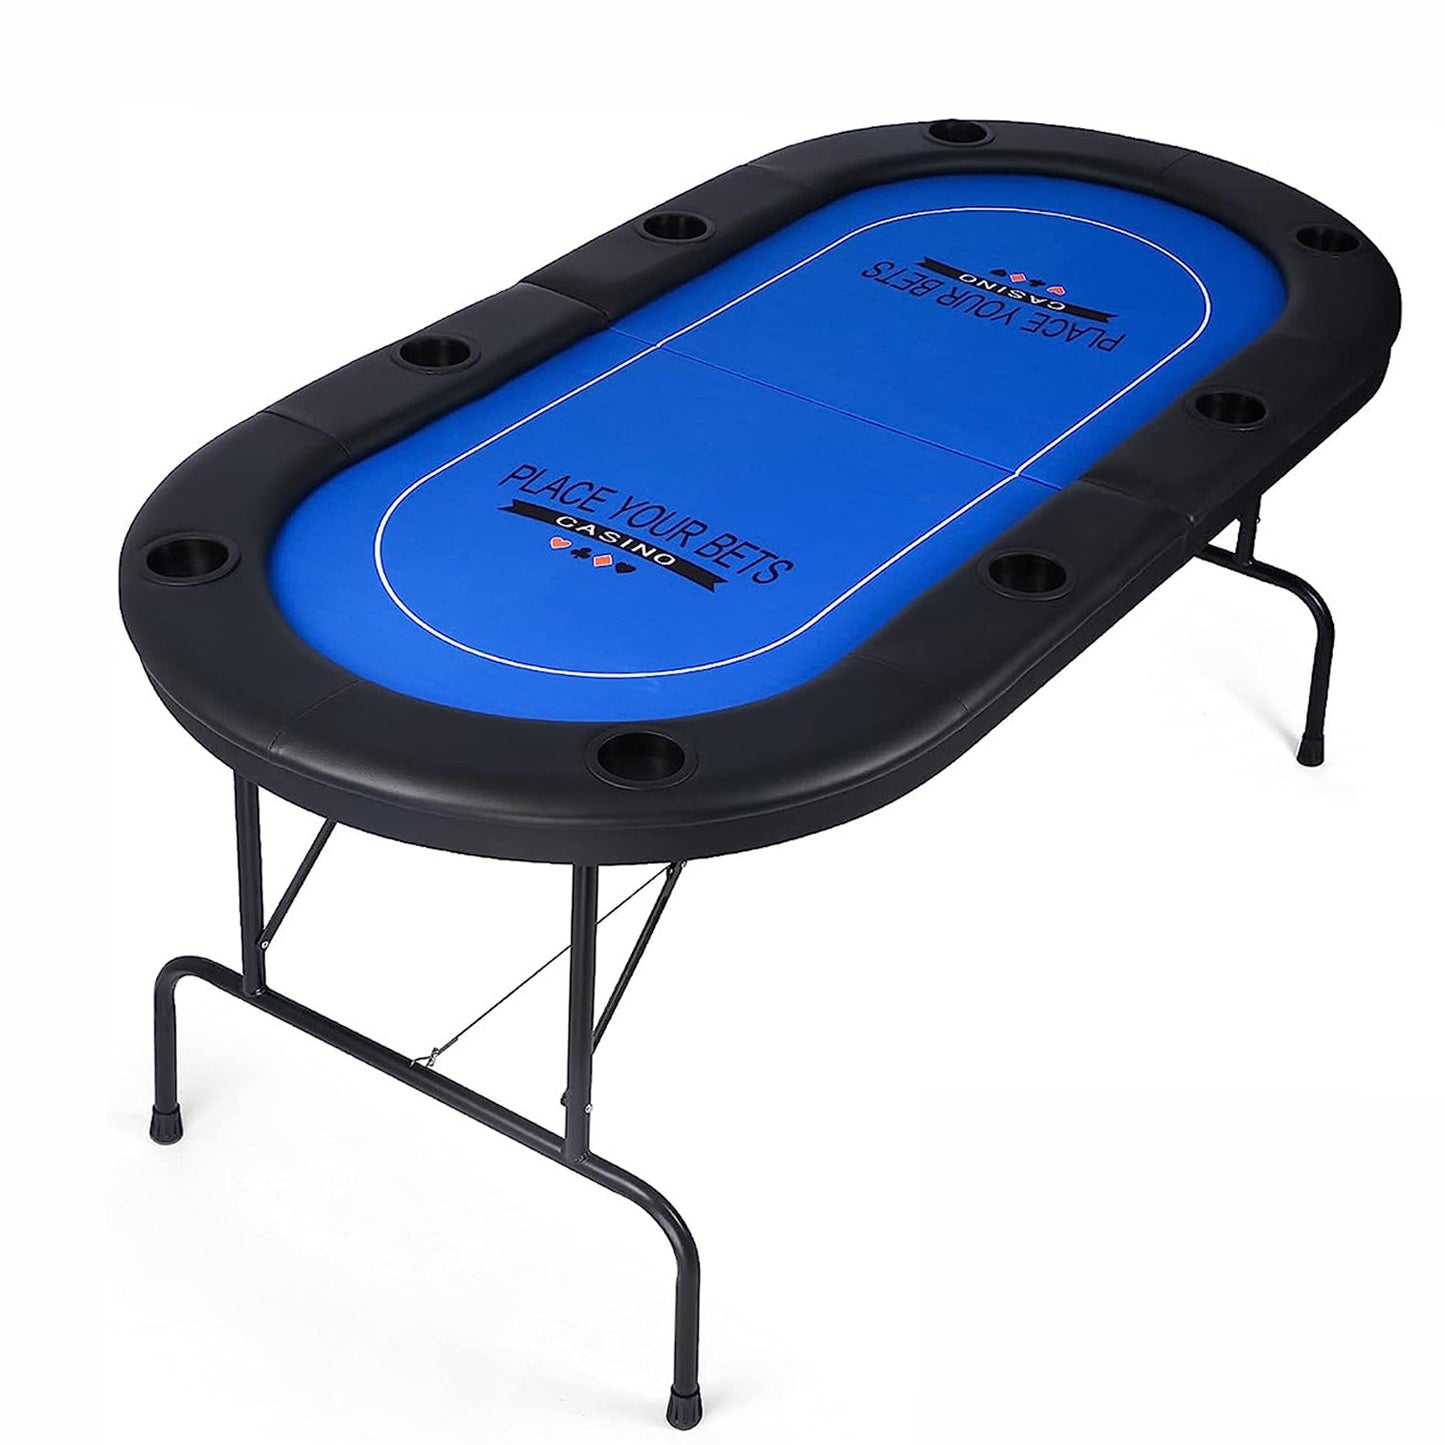 LUCKYERMORE 70.8" Folding Poker Table 8 Player Card Table with 8 Cup Holder for Texas Casino